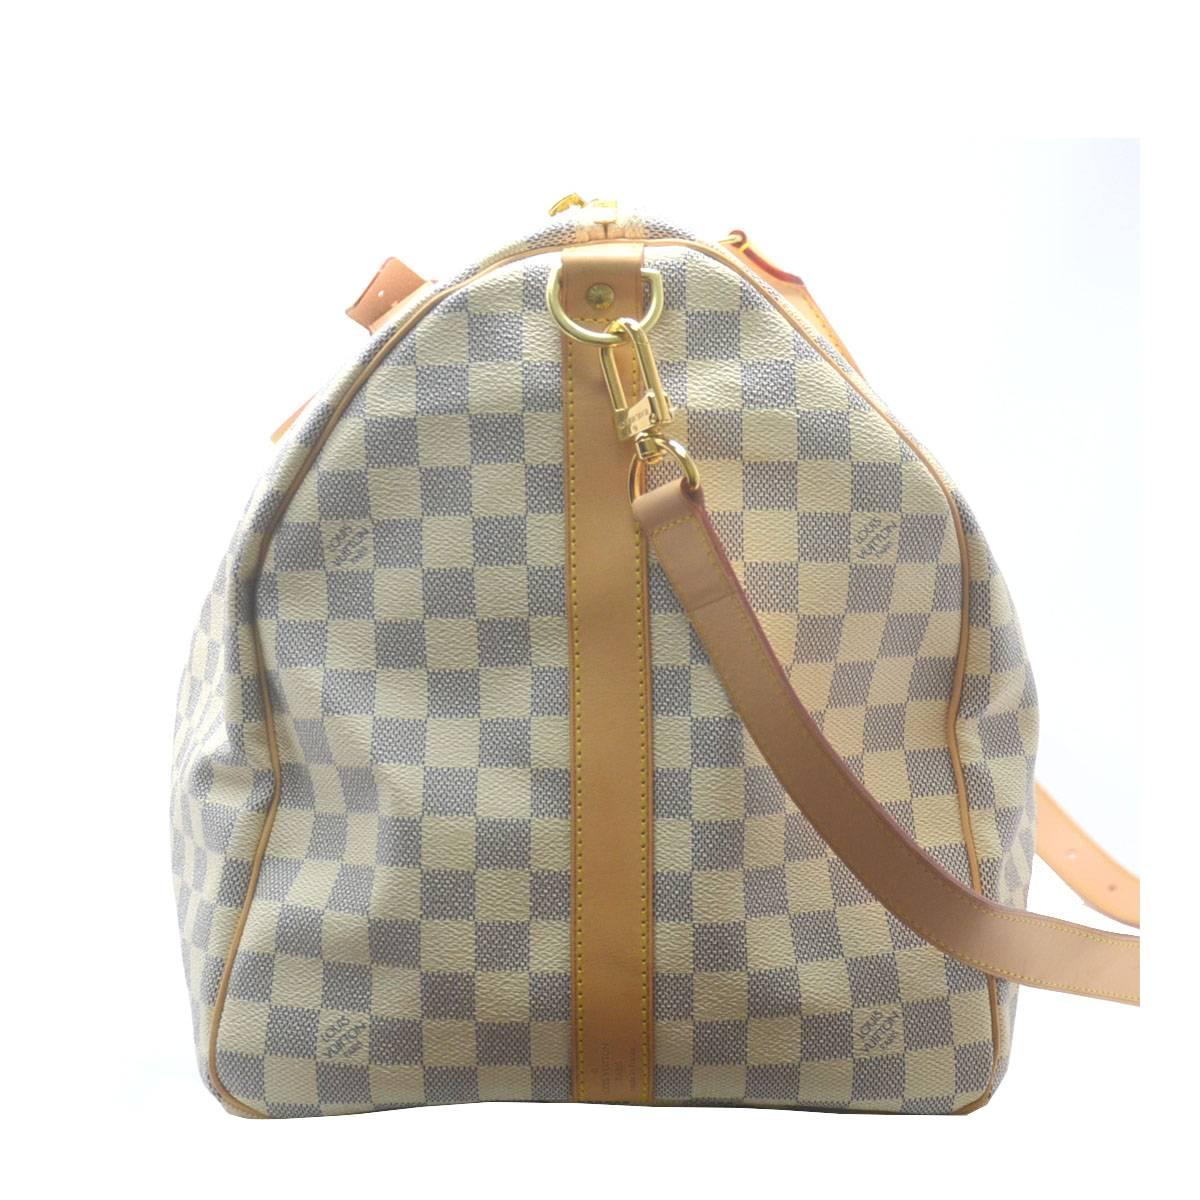 Company-Louis Vuitton
Model-Keepall BANDOULIERE 55 Damier Azur
Color-white
Date Code-DU3141
Material-Canvas
Measurements-21.7 x 12.2 x 9.4
Strap-Adjustable shoulder strap
Outside-Lightly used
Inside-No Stains or Rips
Outside Pockets-N/A
Inside